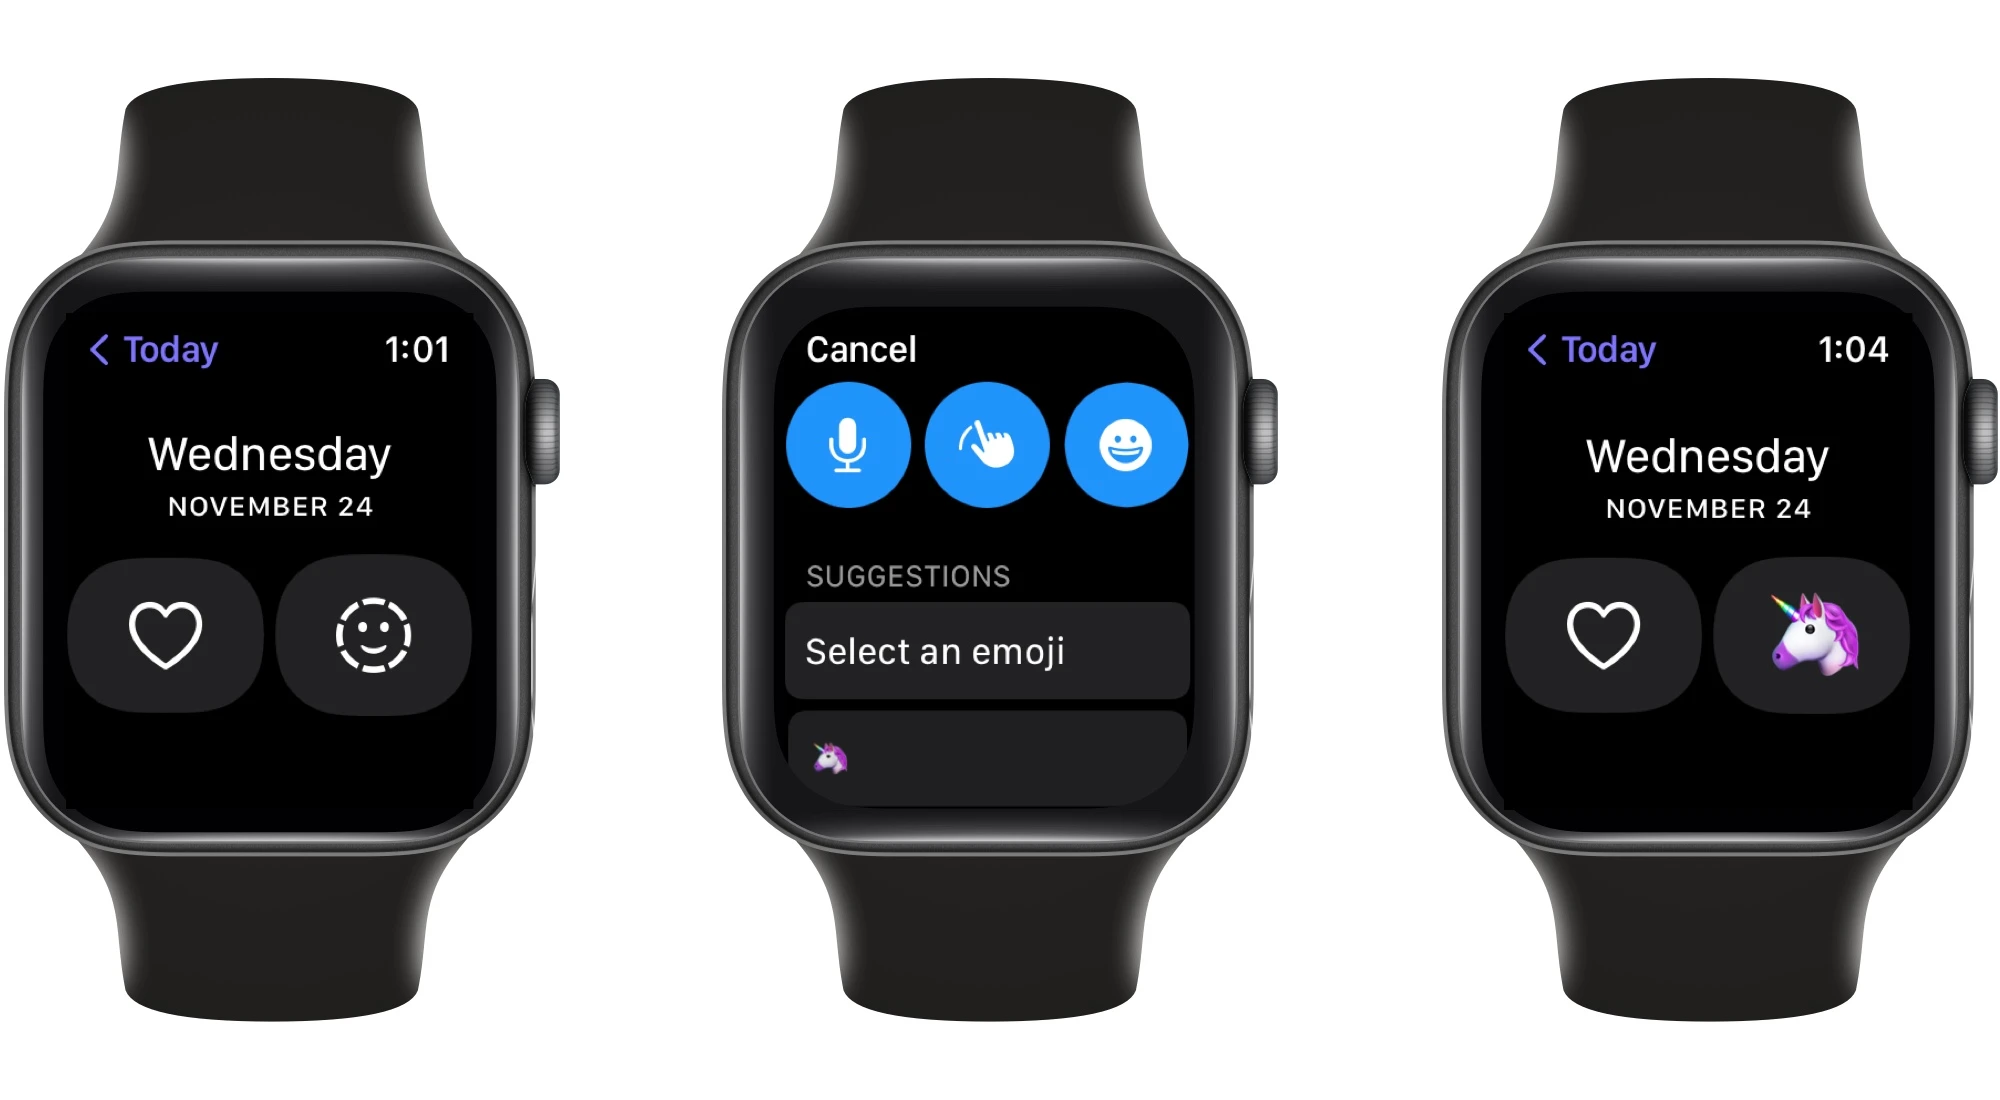 Images of Apple Watch with day favoriting and emoji tagging options